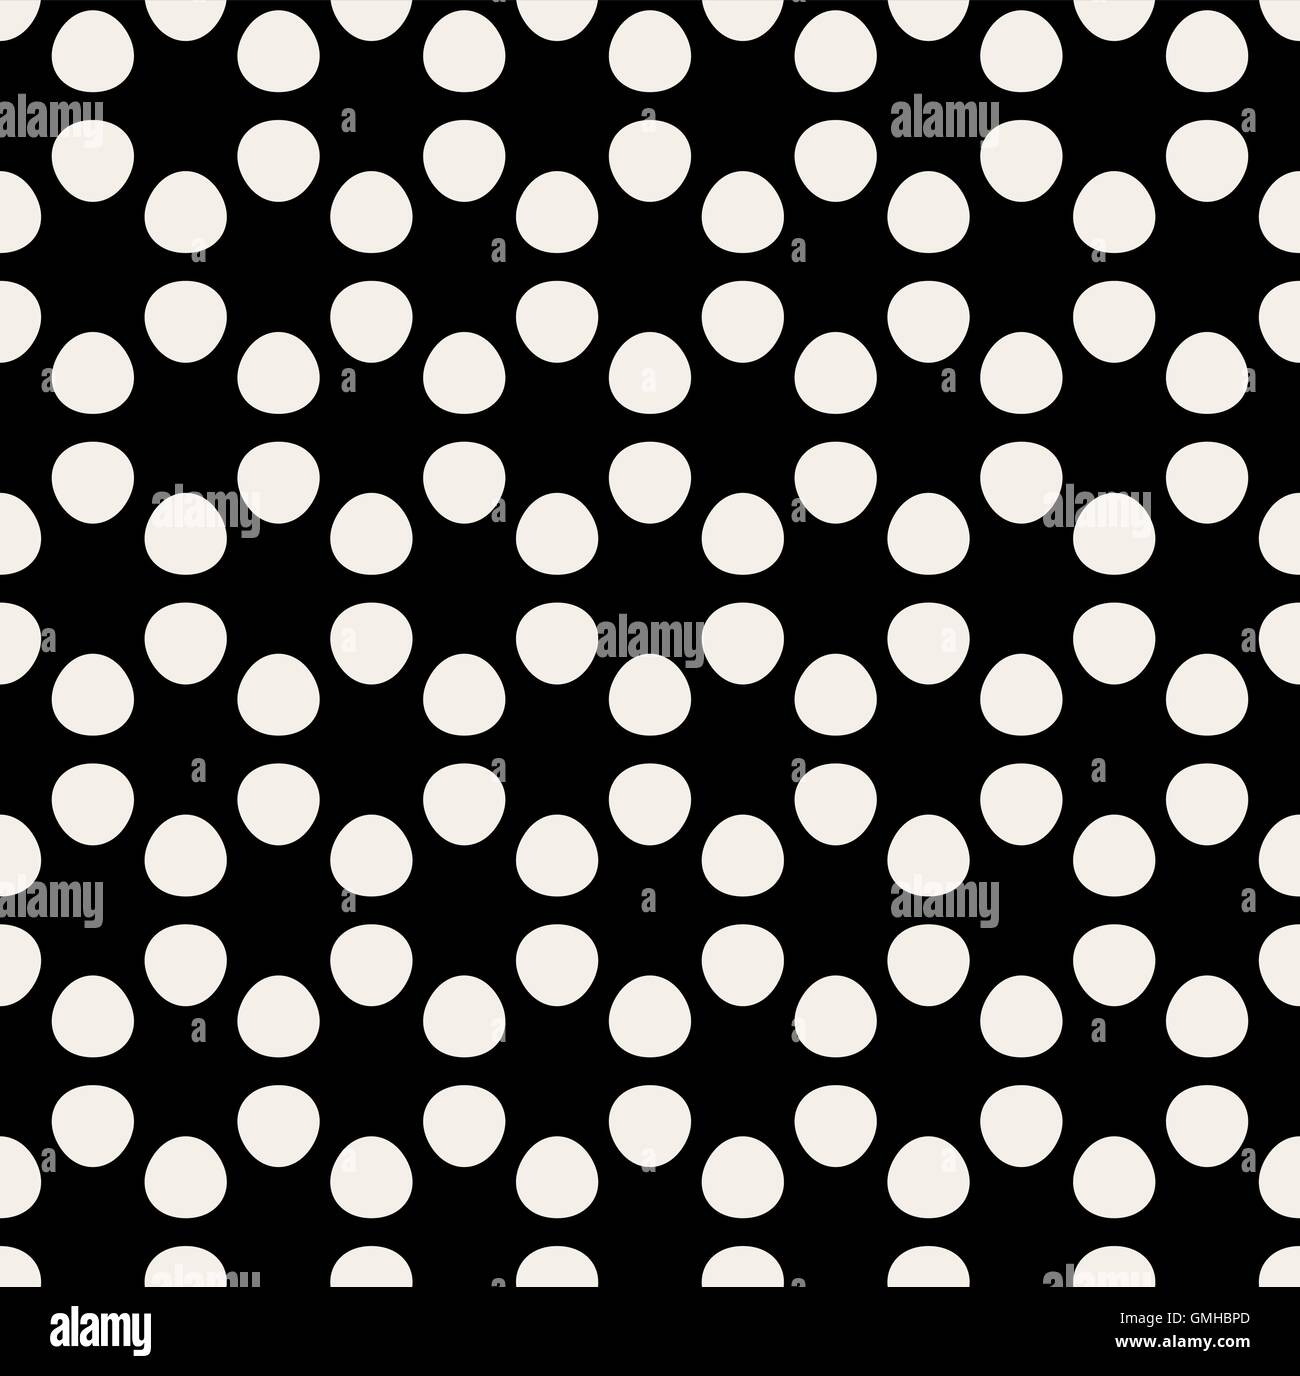 Vector Seamless Hexagonal Circle Rounded Pattern Stock Vector